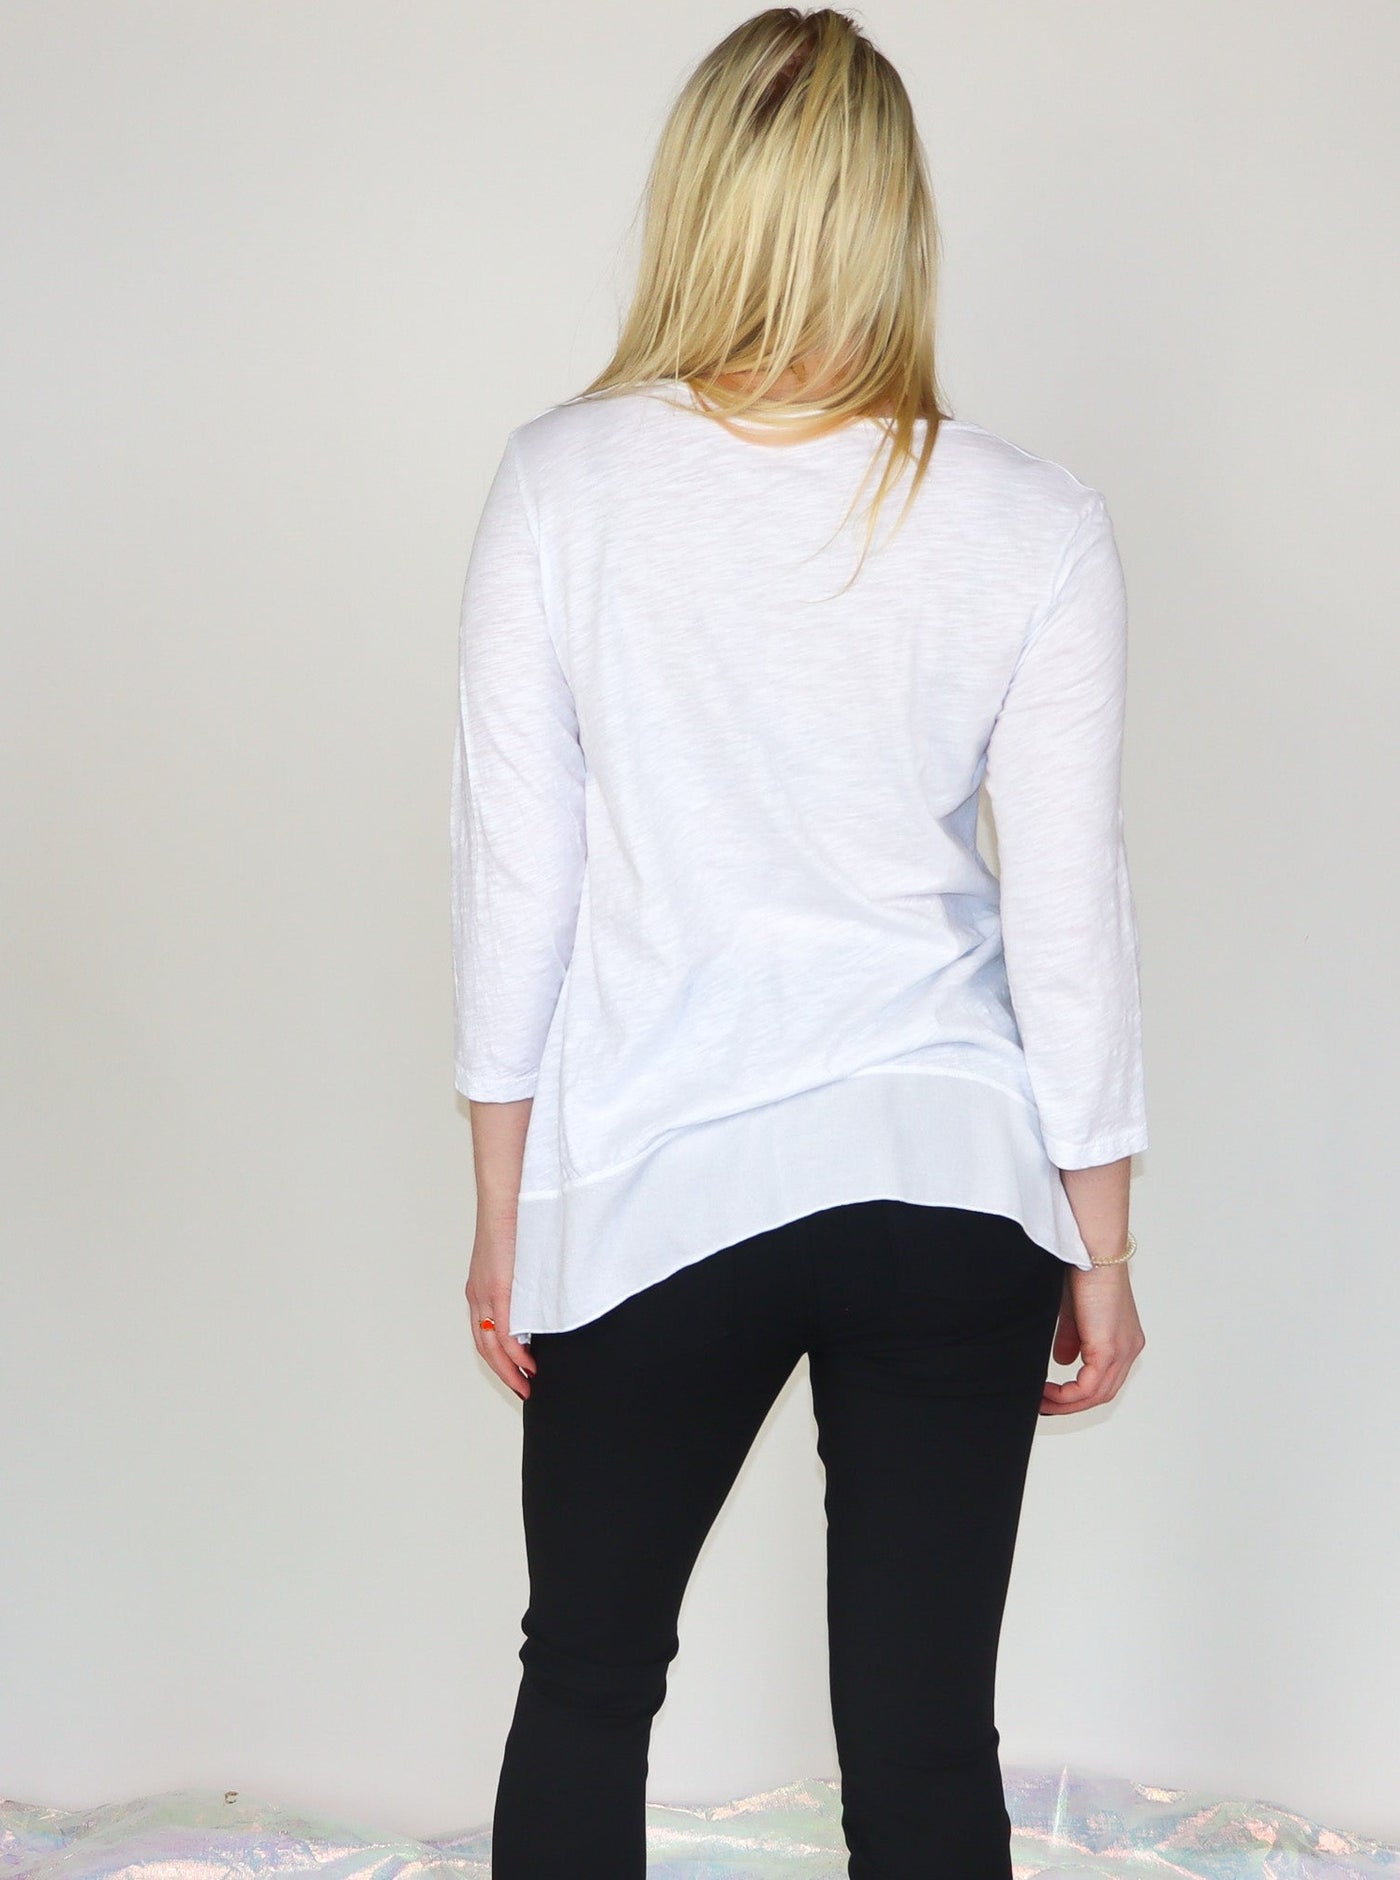 Model is wearing a white 3/4th sleeve tunic top with black abstract print. Top is paired with black skinny jeans.